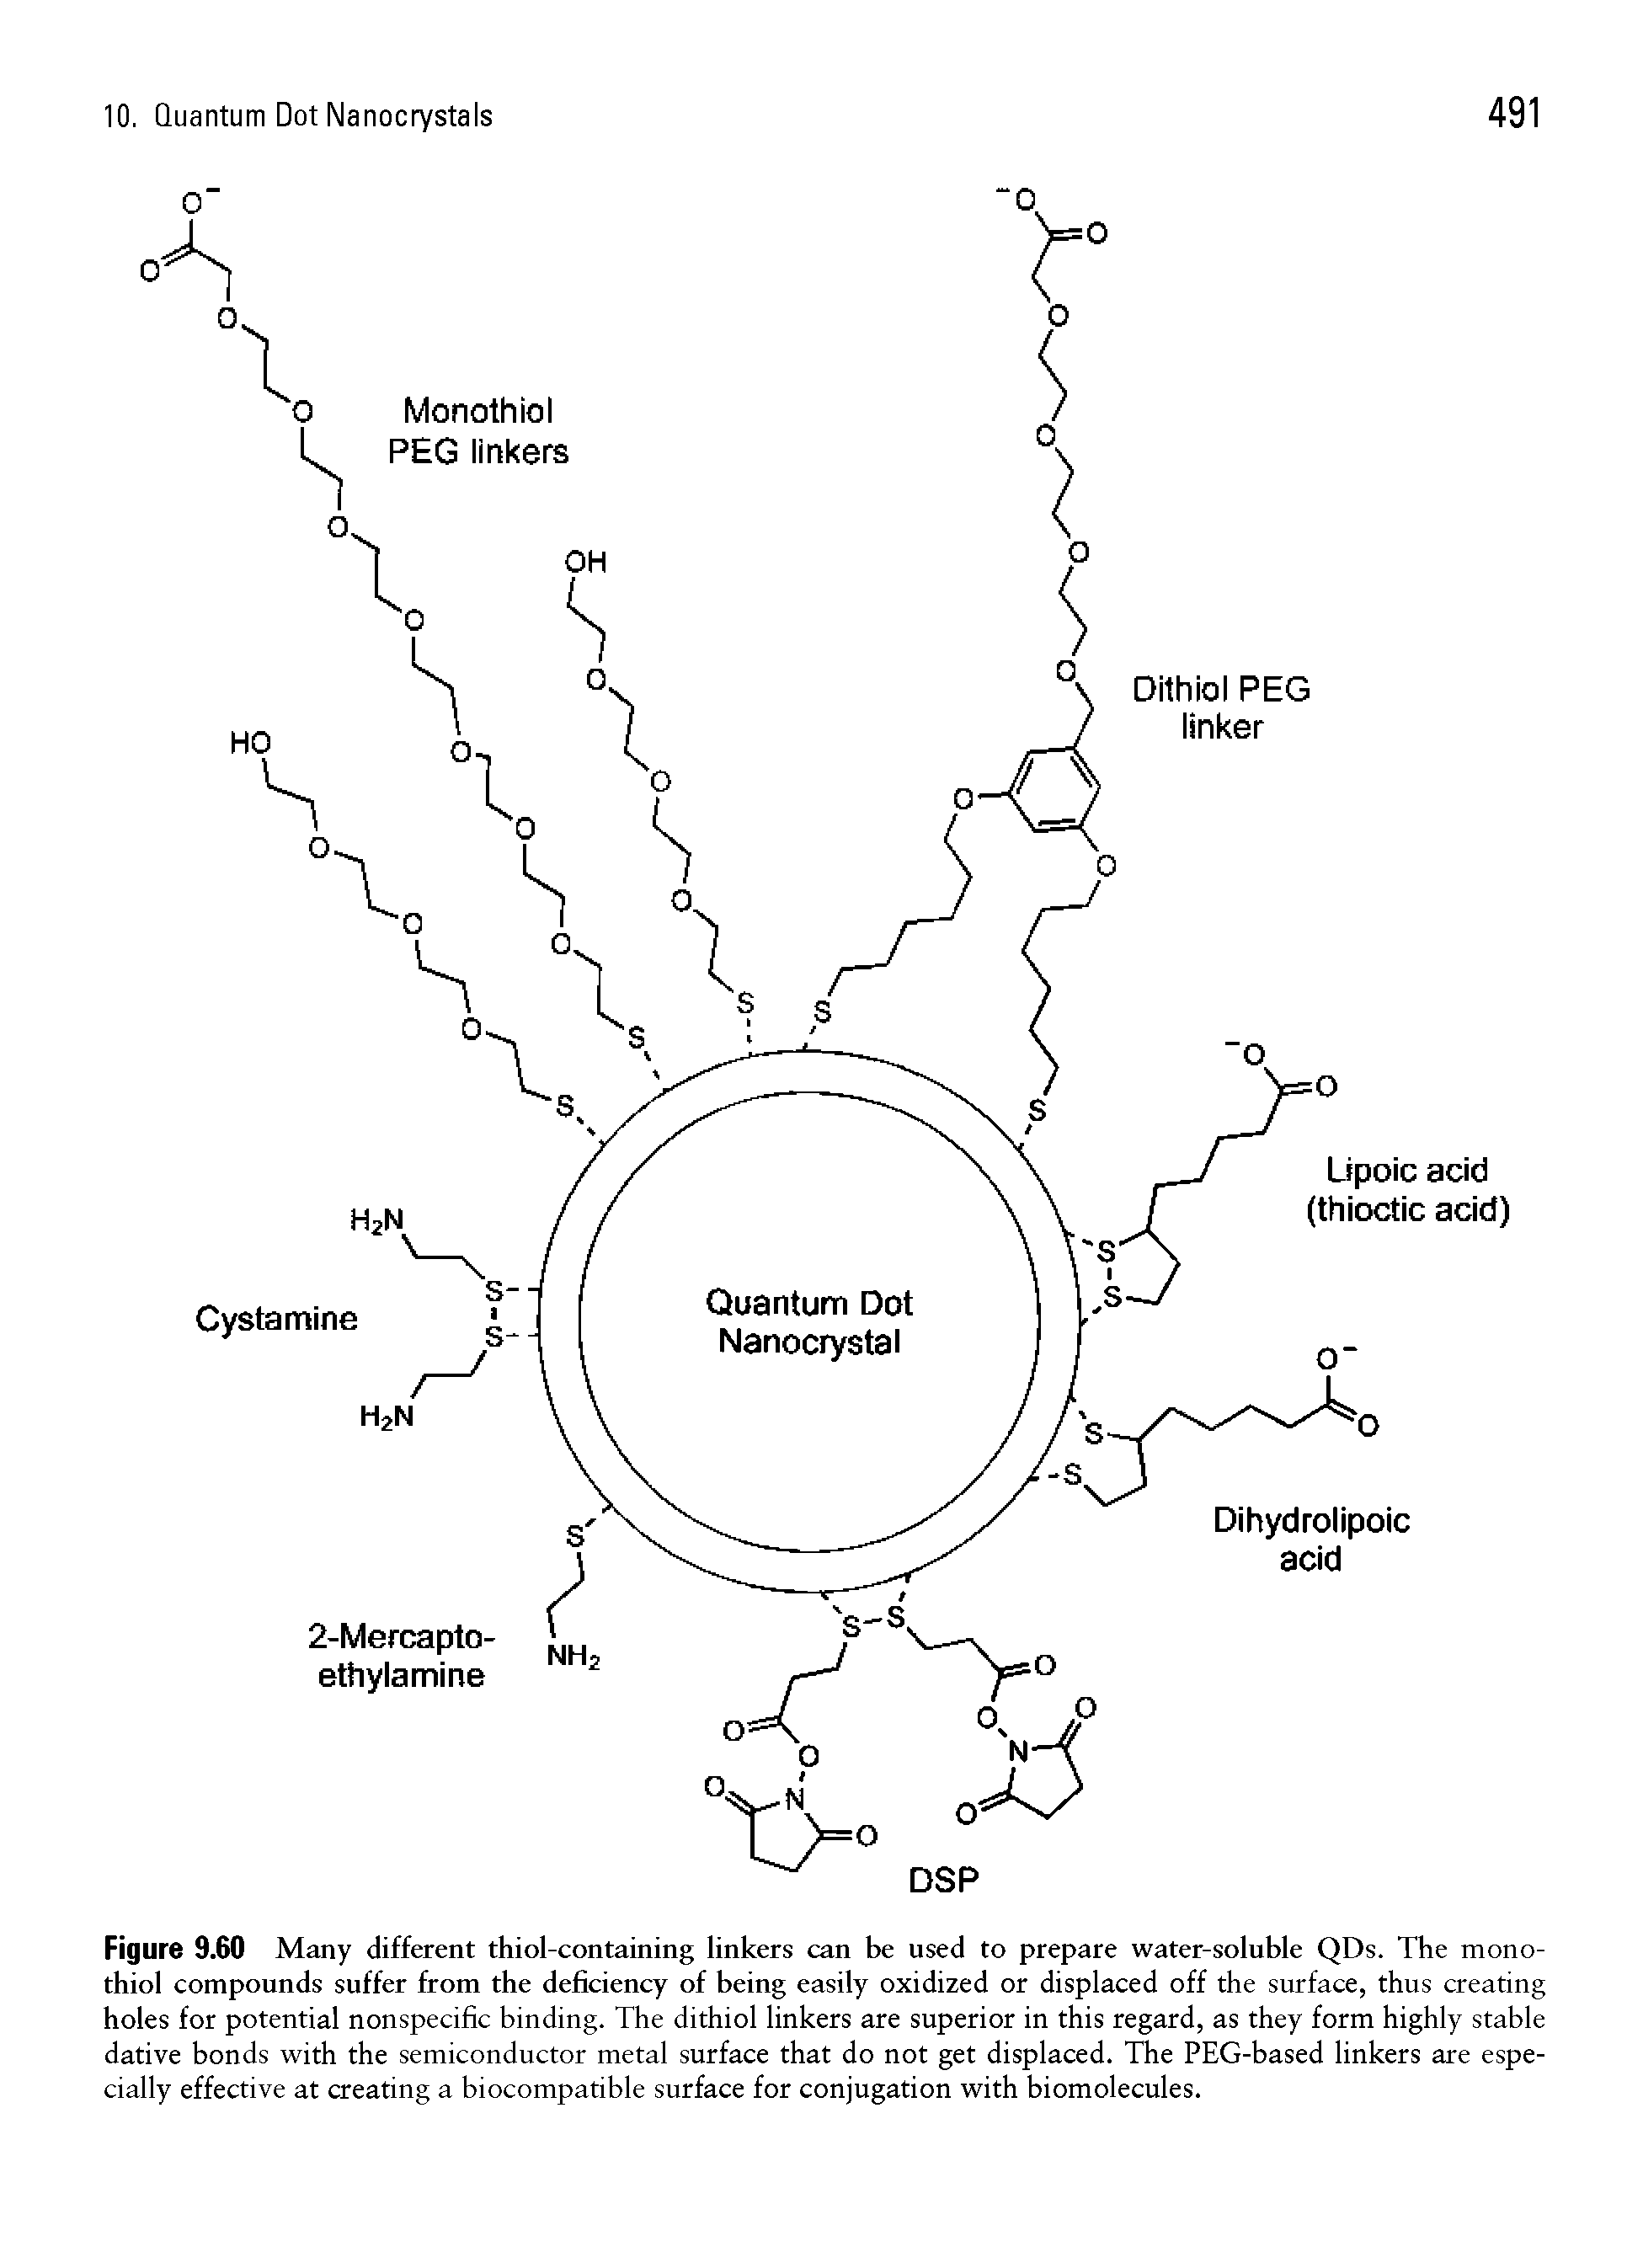 Figure 9.60 Many different thiol-containing linkers can be used to prepare water-soluble QDs. The monothiol compounds suffer from the deficiency of being easily oxidized or displaced off the surface, thus creating holes for potential nonspecific binding. The dithiol linkers are superior in this regard, as they form highly stable dative bonds with the semiconductor metal surface that do not get displaced. The PEG-based linkers are especially effective at creating a biocompatible surface for conjugation with biomolecules.